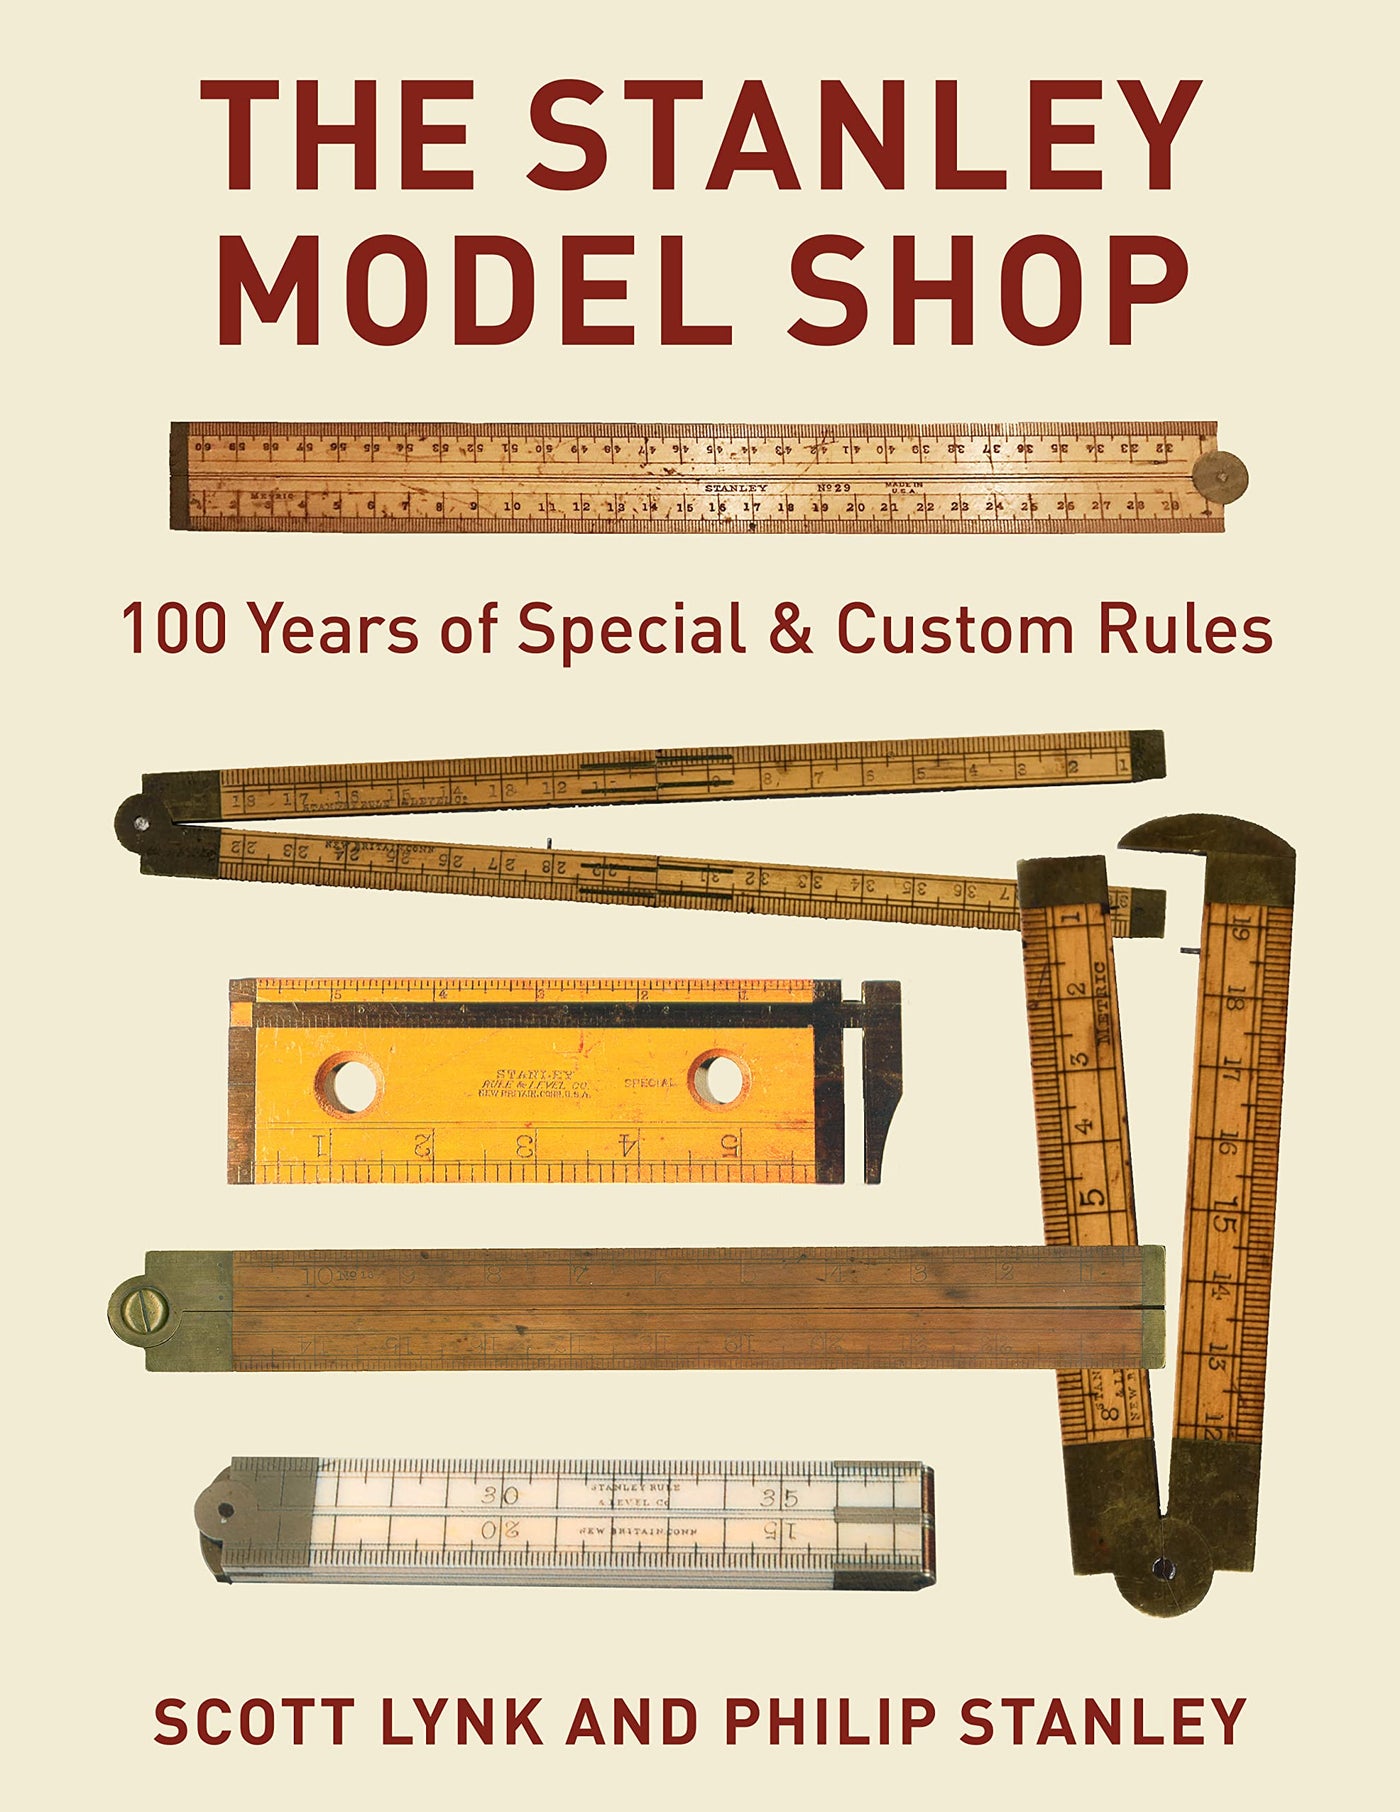 The Stanley Model Shop 100 Years of Special & Custom Rules